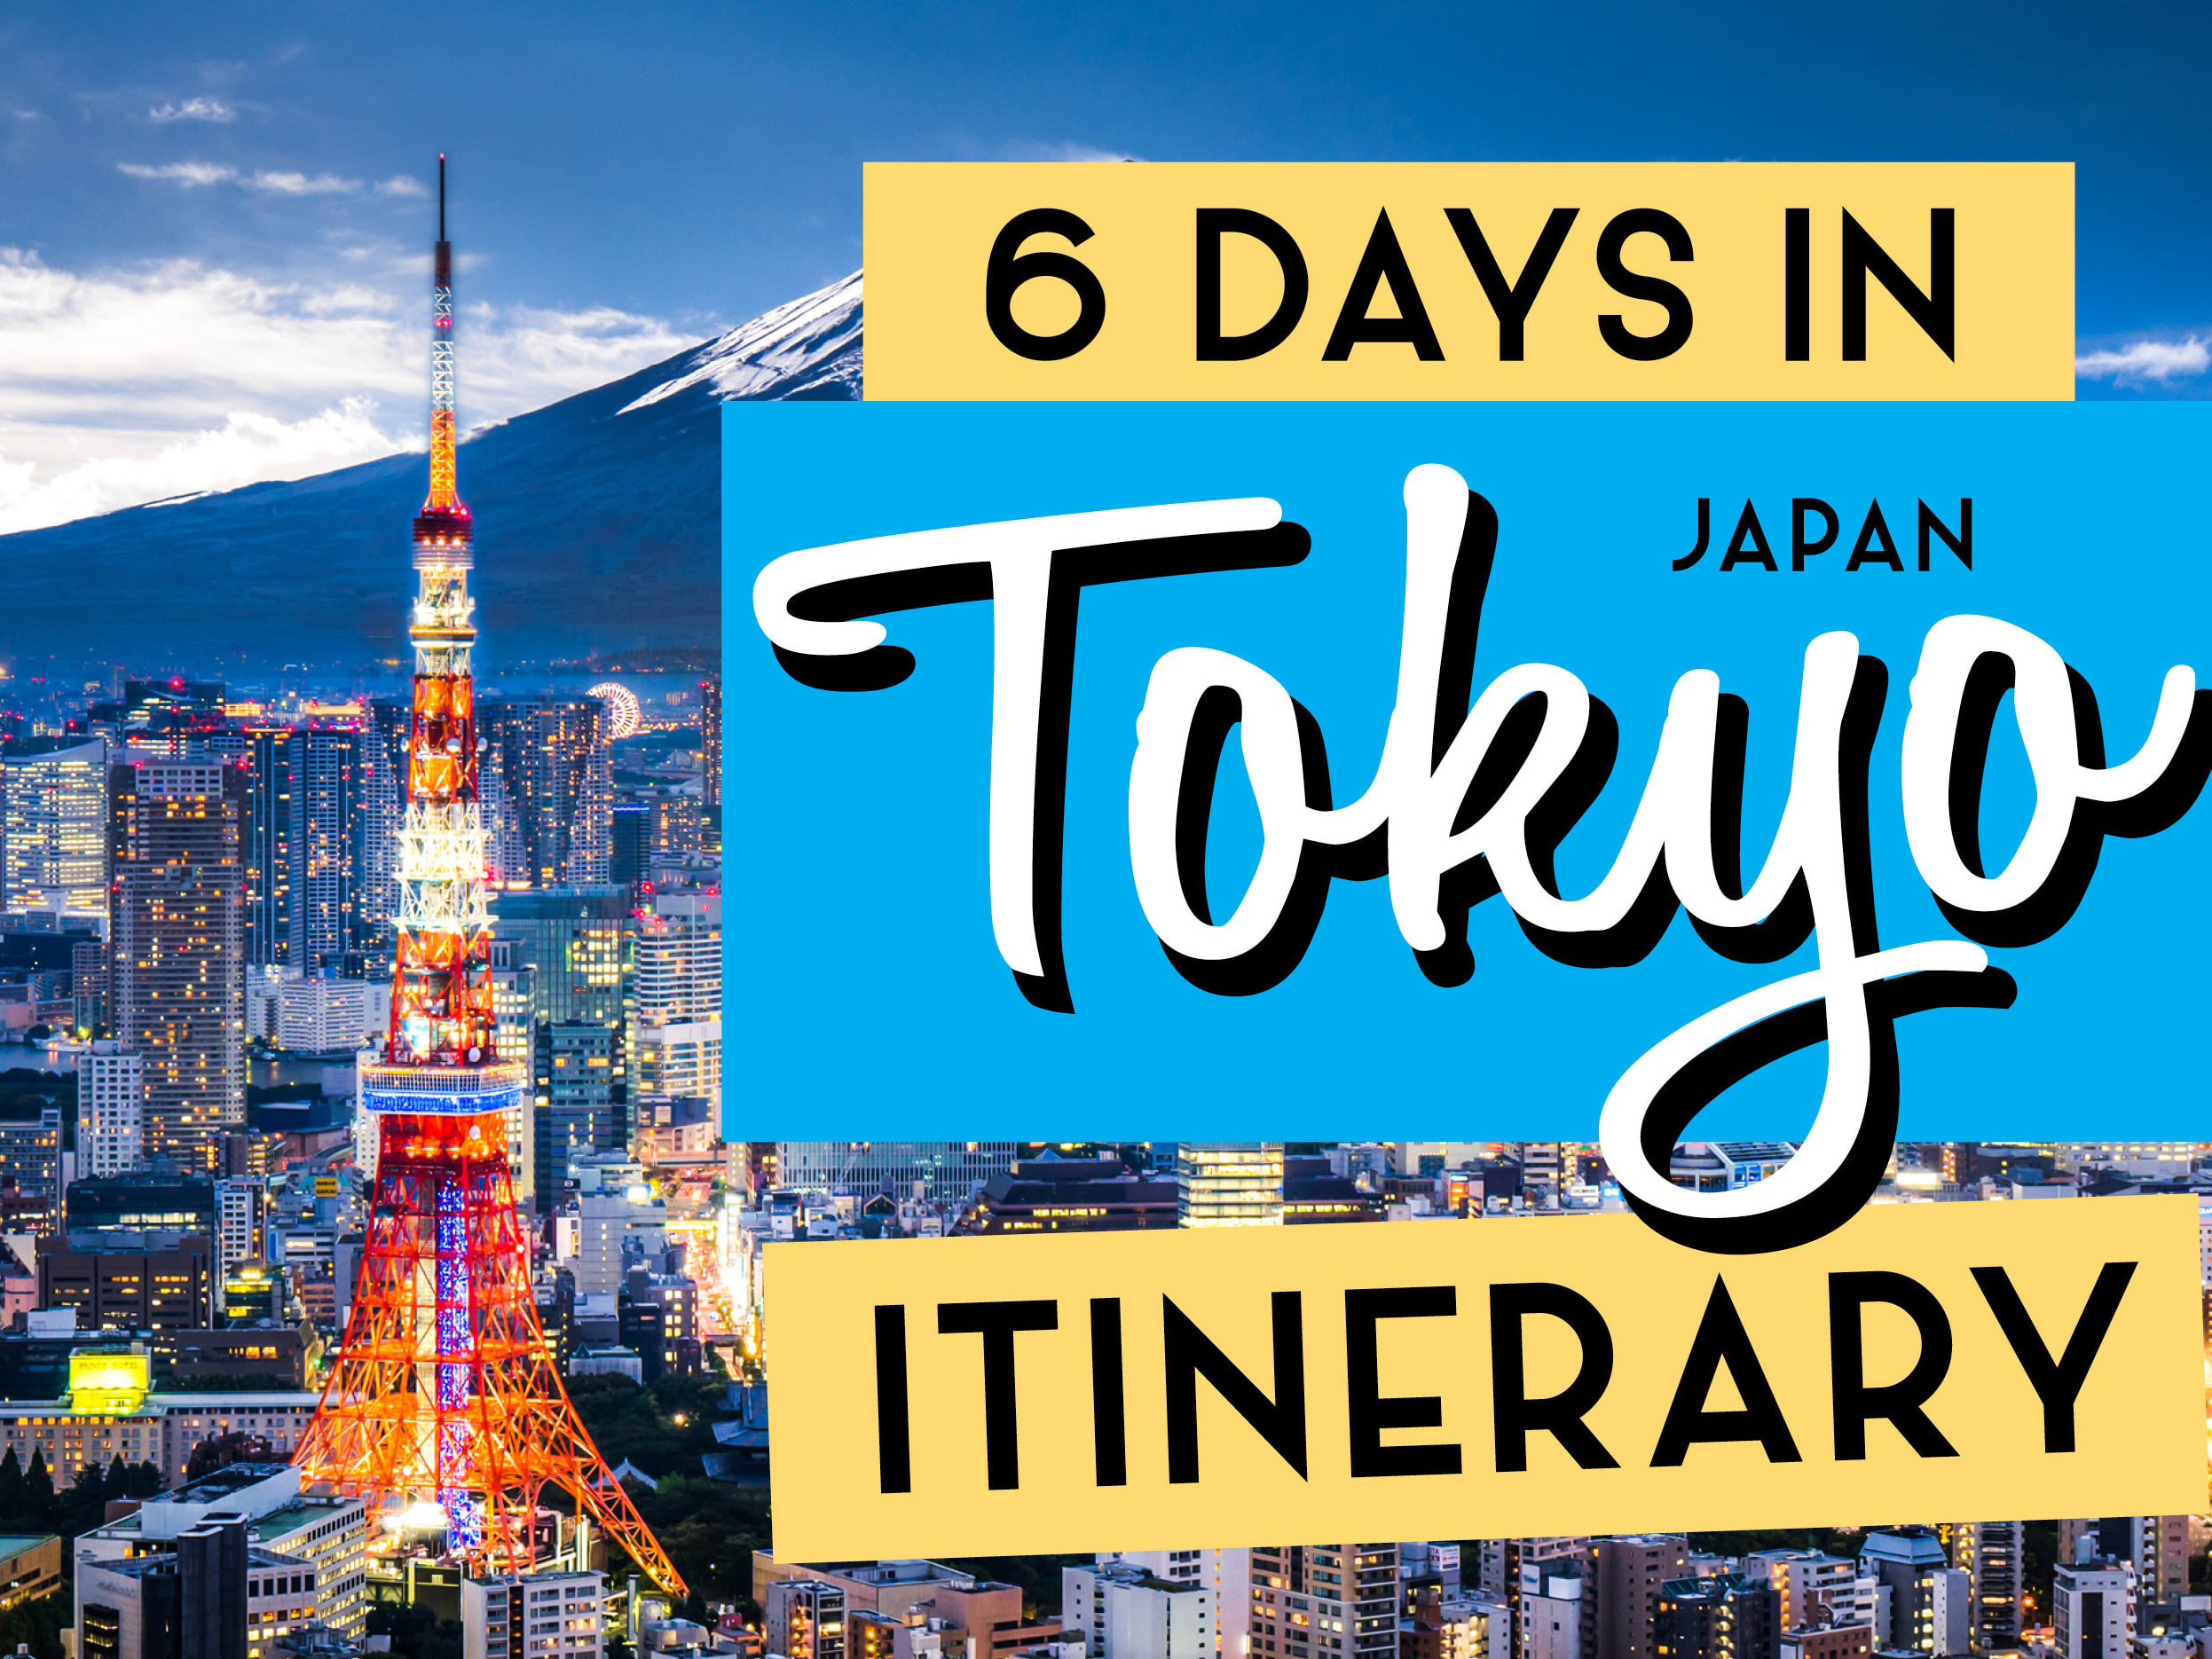 Eastern Tokyo  The Official Tokyo Travel Guide, GO TOKYO